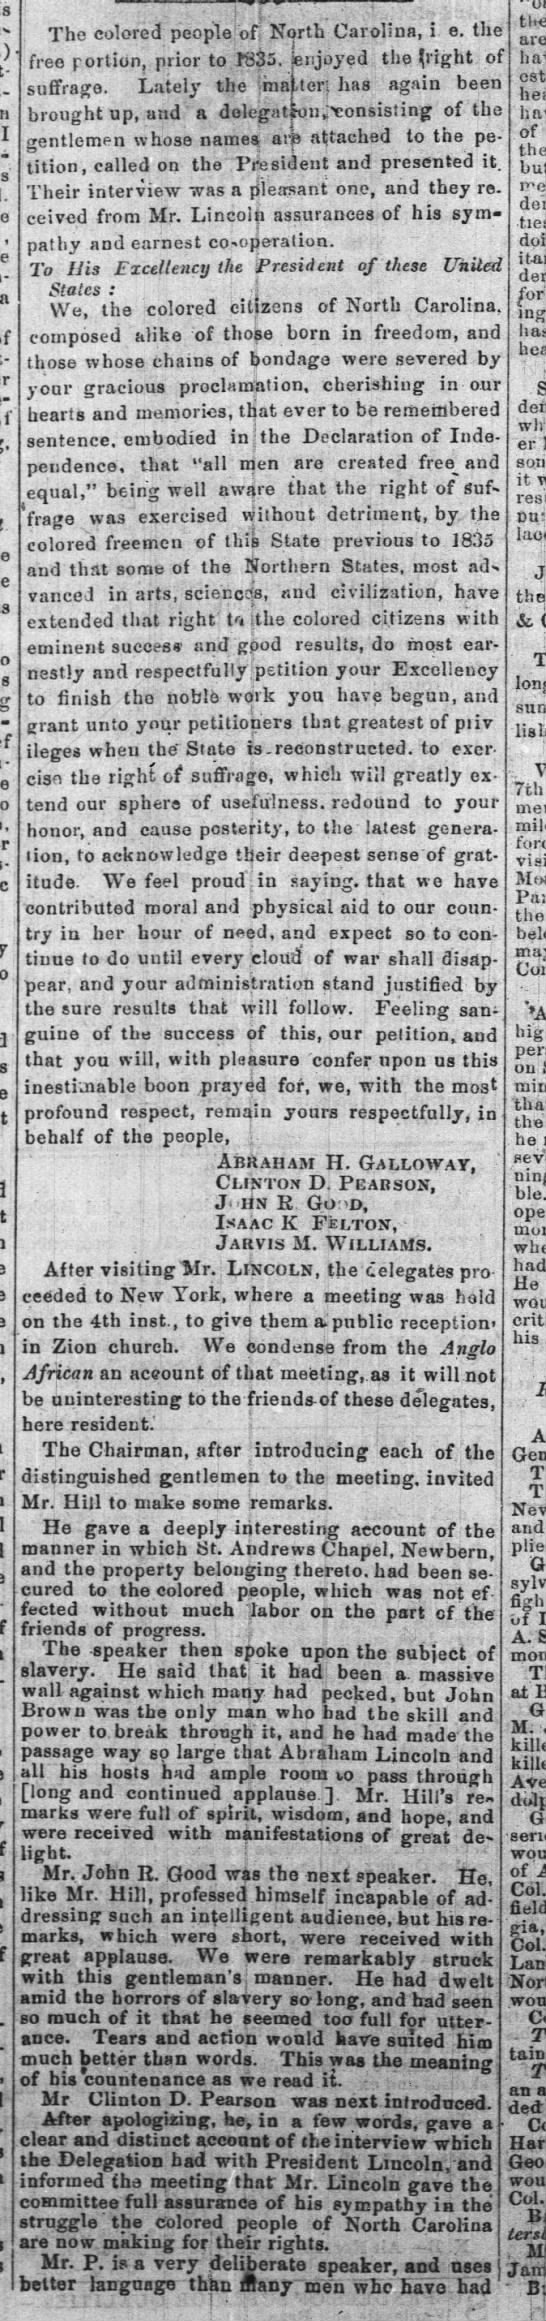 1864 New Bernians visit Lincoln, col. 1 - 